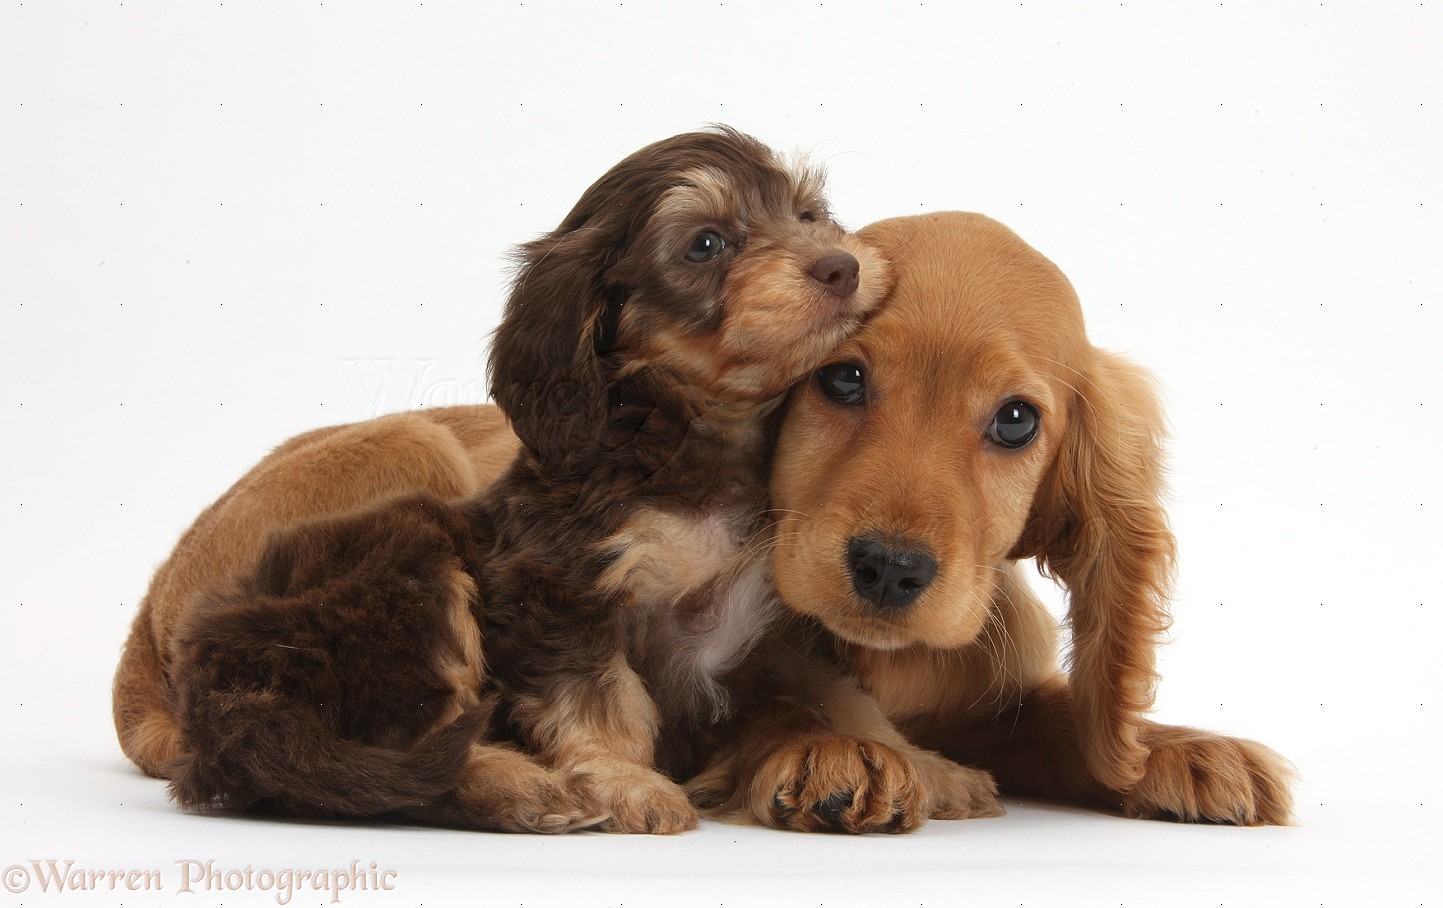 Cute Alpine Spaniel Puppies: Cute Cute Dogs And Puppies Breed